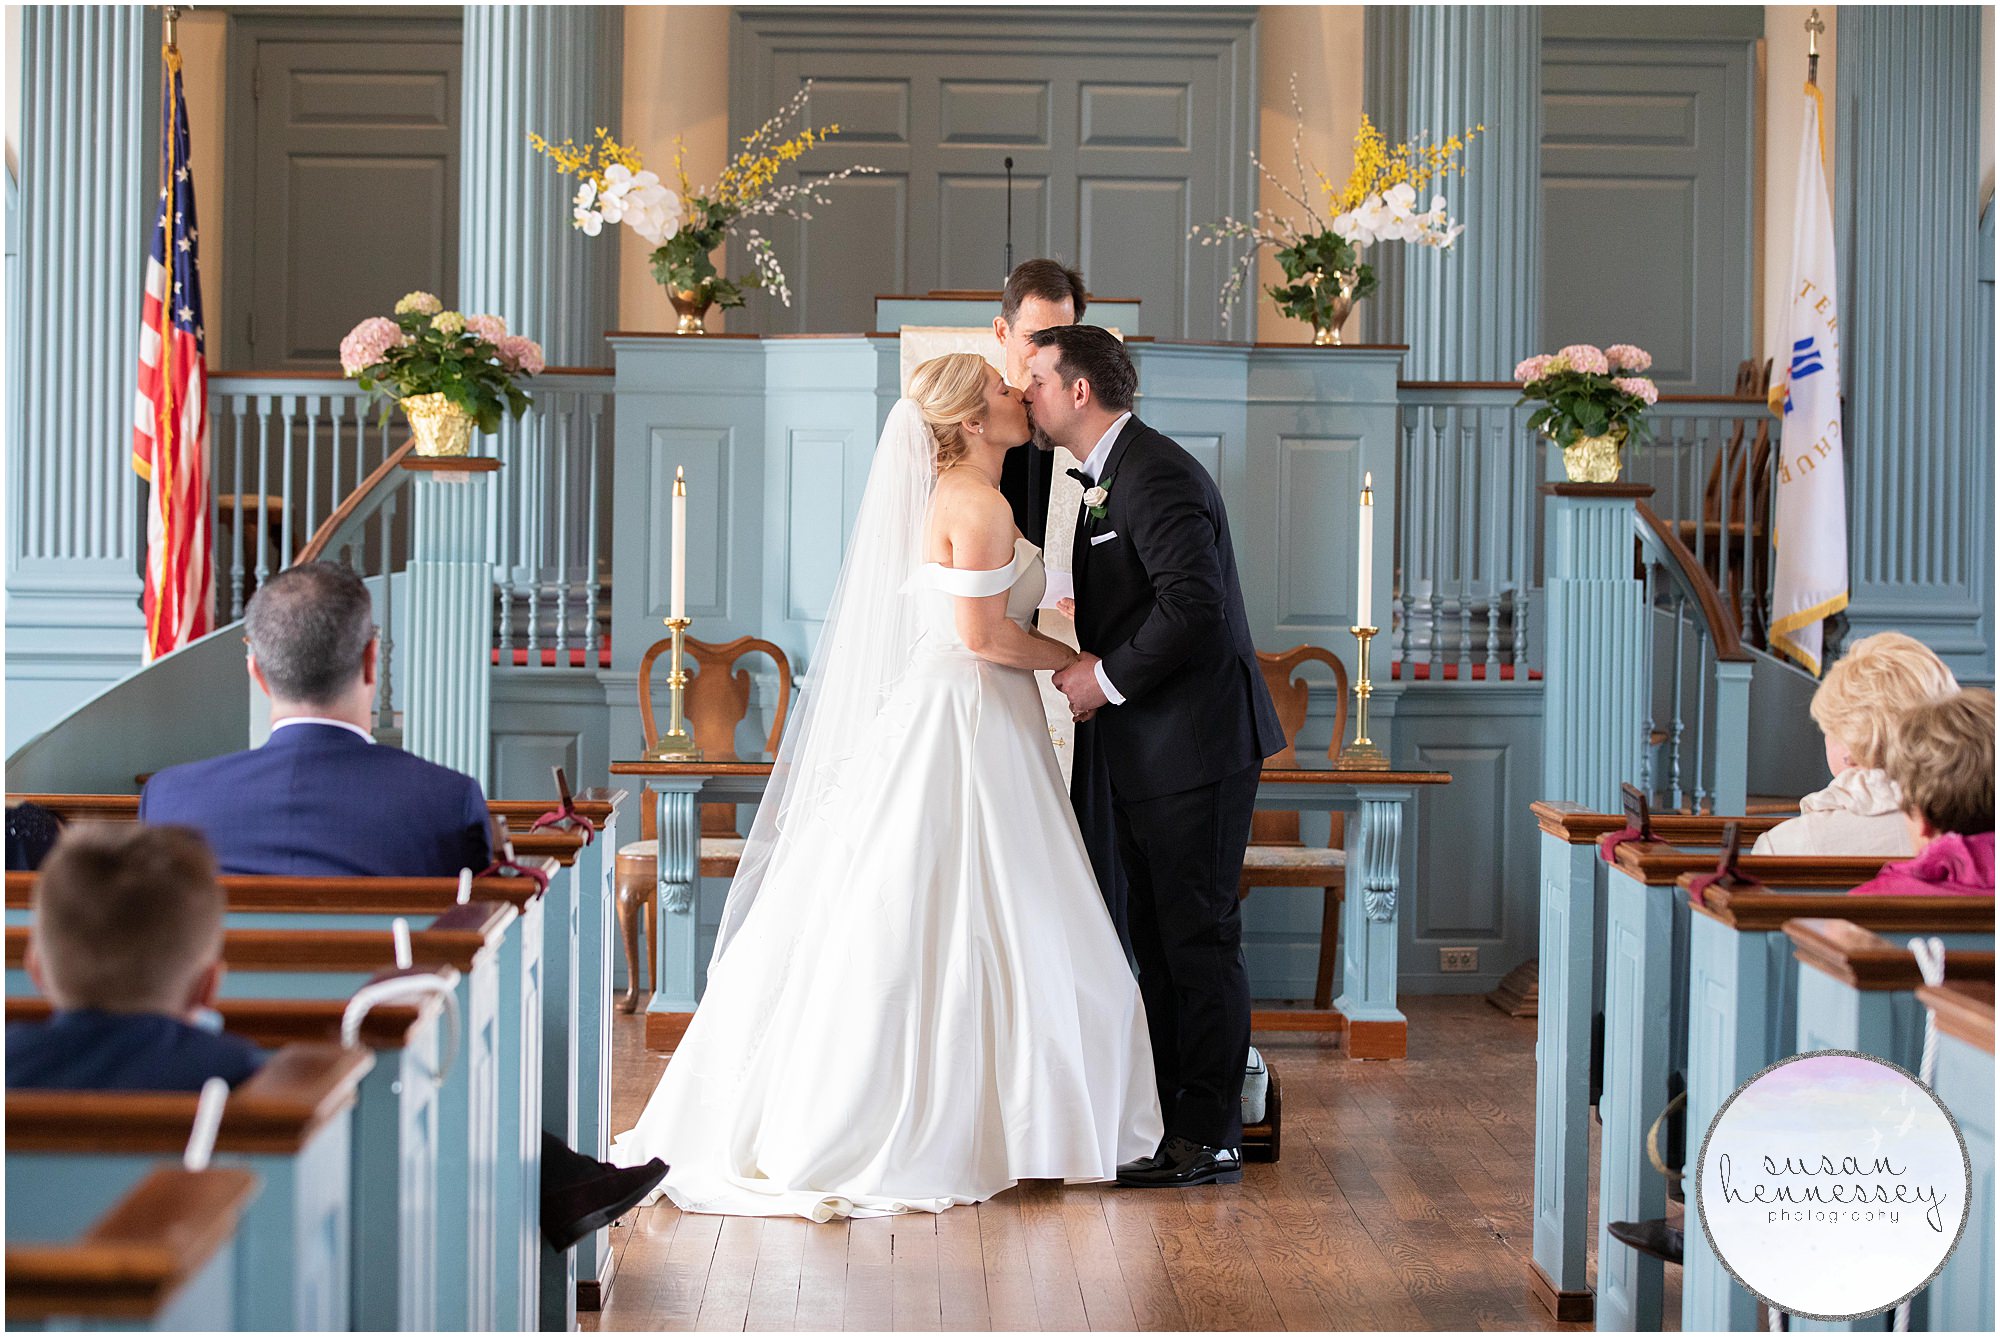 Planning a Micro Wedding? Erica and Alex tied the knot The First Presbyterian Church of Moorestown